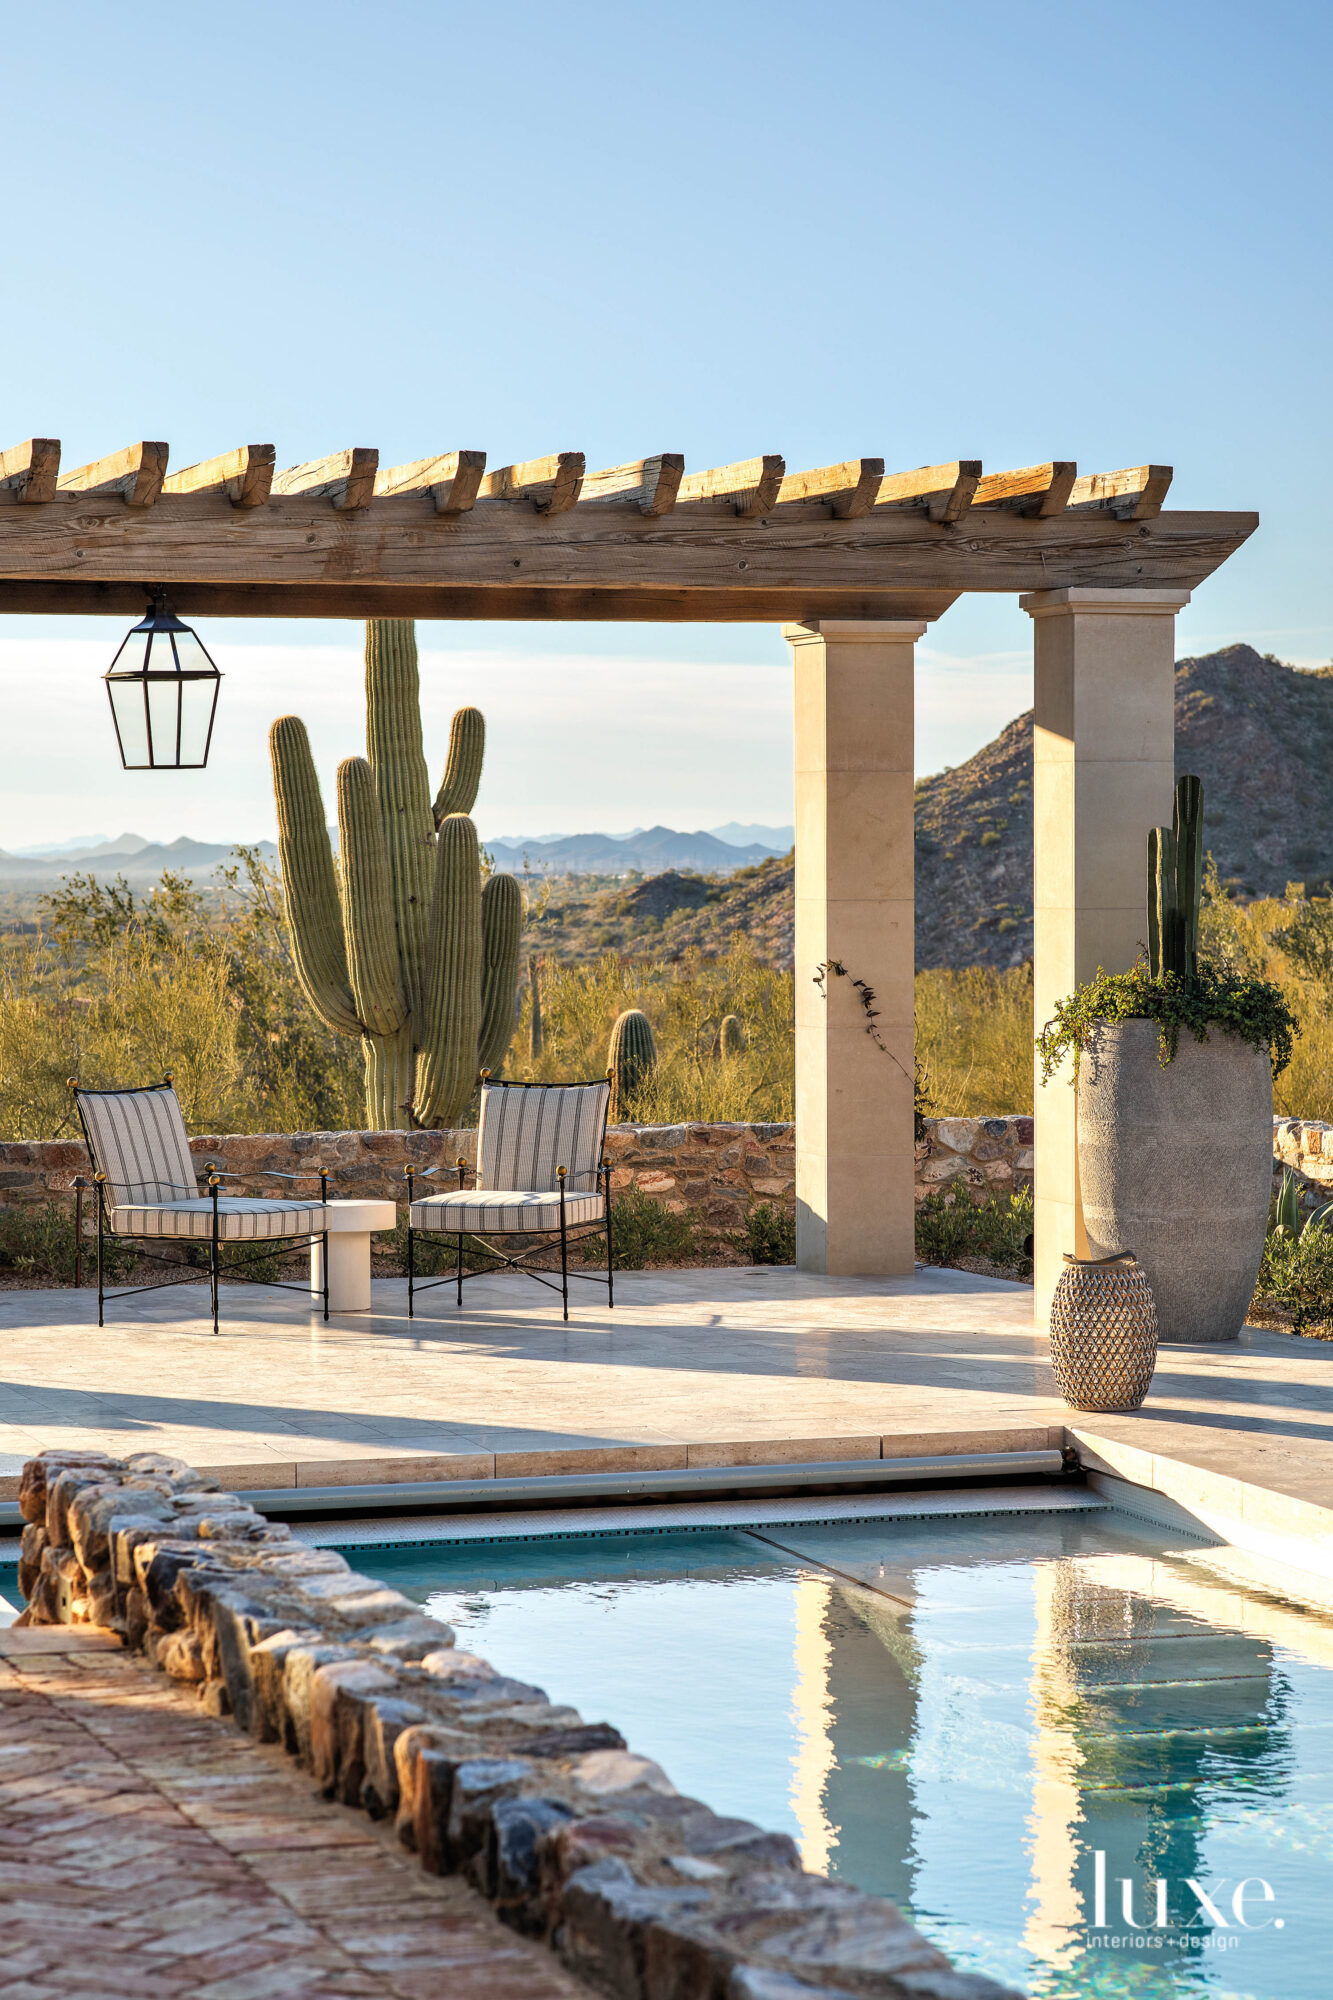 A cactus and a stunning mountain view sit poolside in the backyard